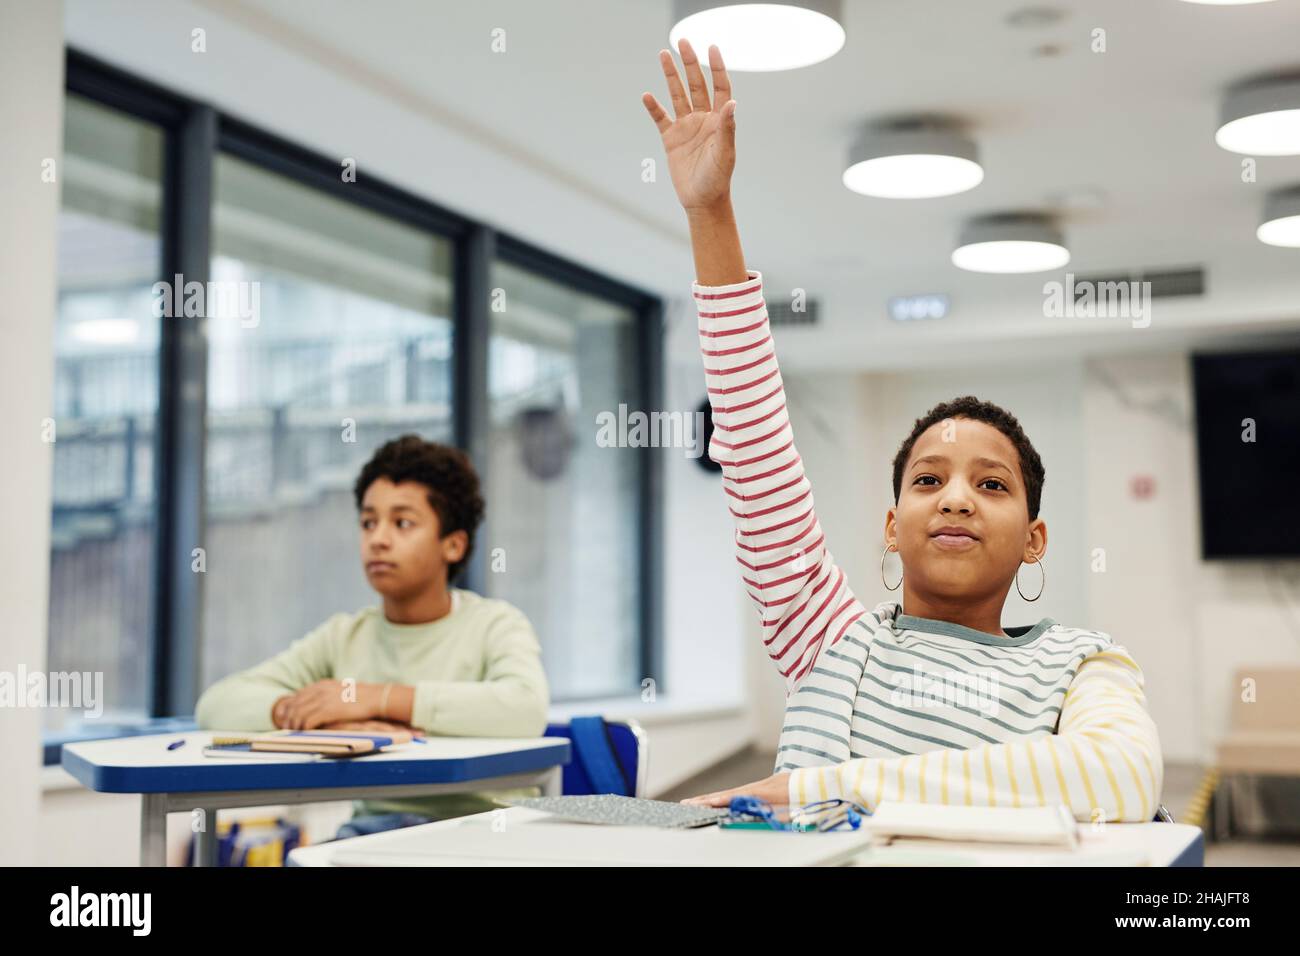 Portrait of African-American girl with short hair raising hand in modern classroom, copy space Stock Photo